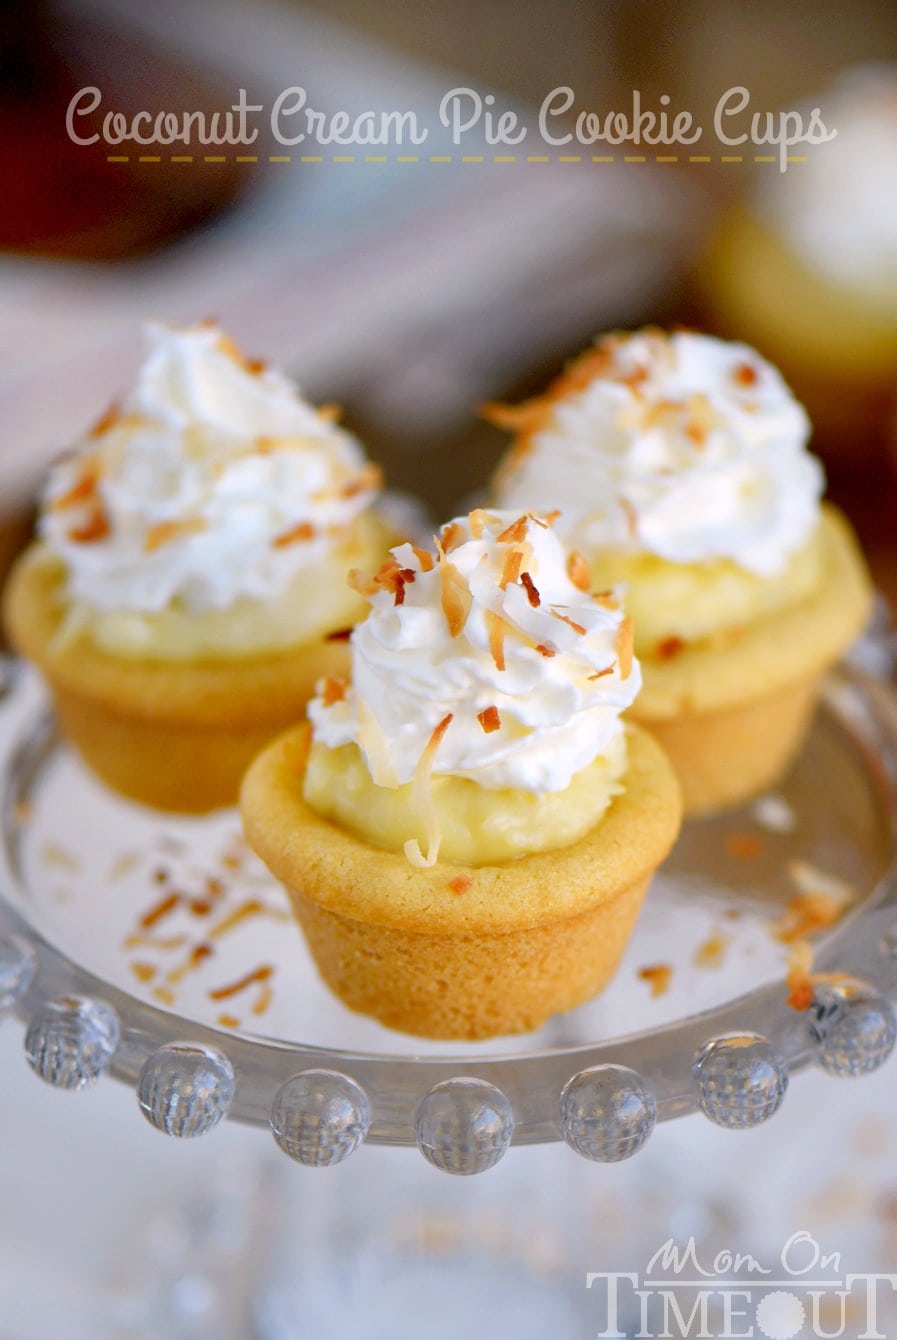 Coconut Cream Pie Cookie Cups! Two of my favorite desserts collide in this easy to make recipe that will have your guests oohing and aahing in no time!